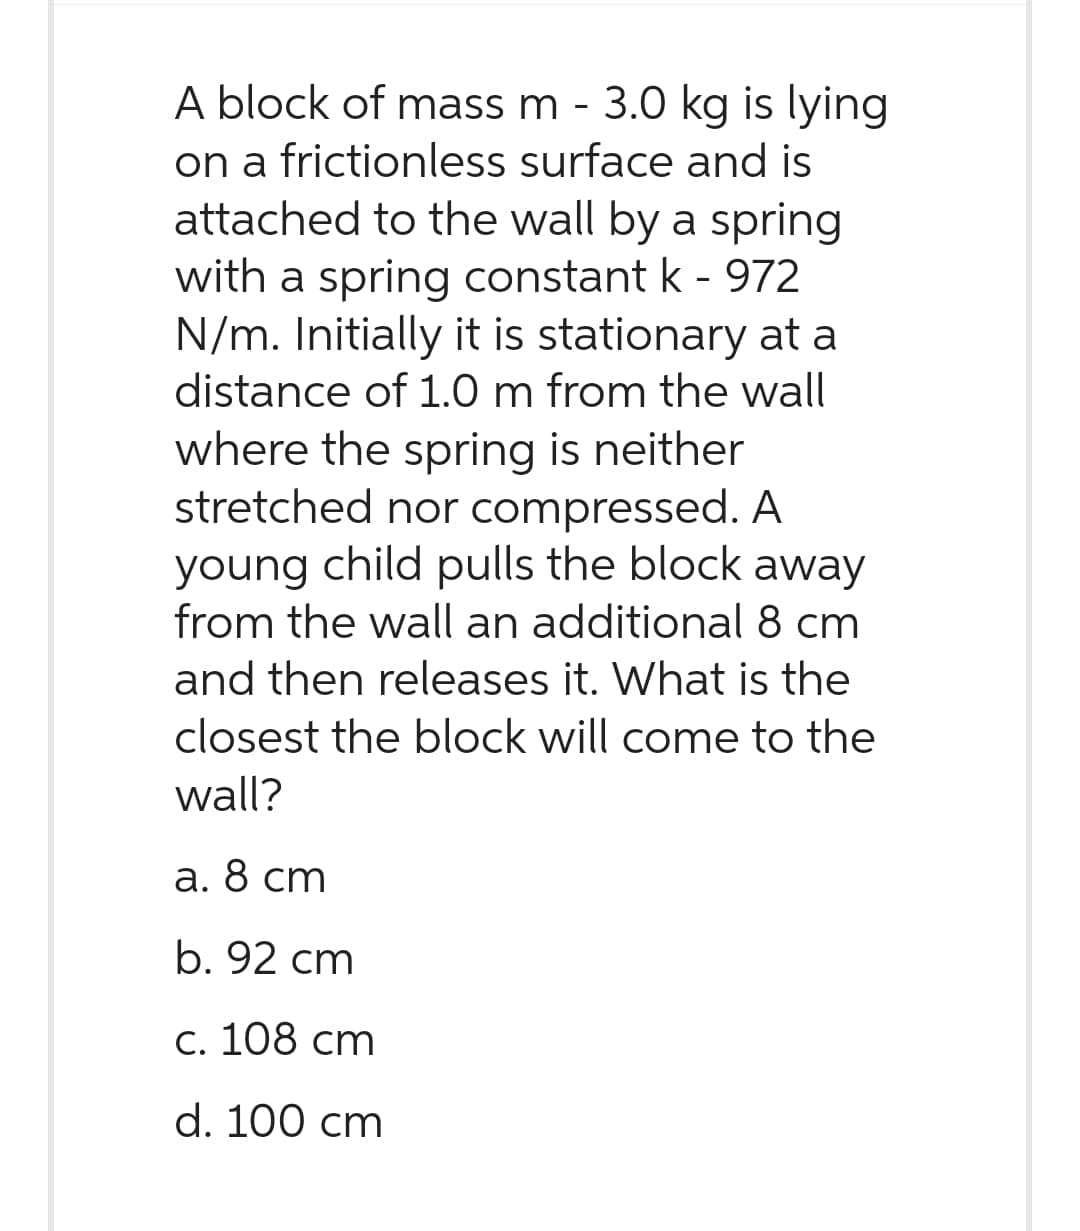 A block of mass m - 3.0 kg is lying
on a frictionless surface and is
attached to the wall by a spring
with a spring constant k - 972
N/m. Initially it is stationary at a
distance of 1.0 m from the wall
where the spring is neither
stretched nor compressed. A
young child pulls the block away
from the wall an additional 8 cm
and then releases it. What is the
closest the block will come to the
wall?
a. 8 cm
b. 92 cm
c. 108 cm
d. 100 cm